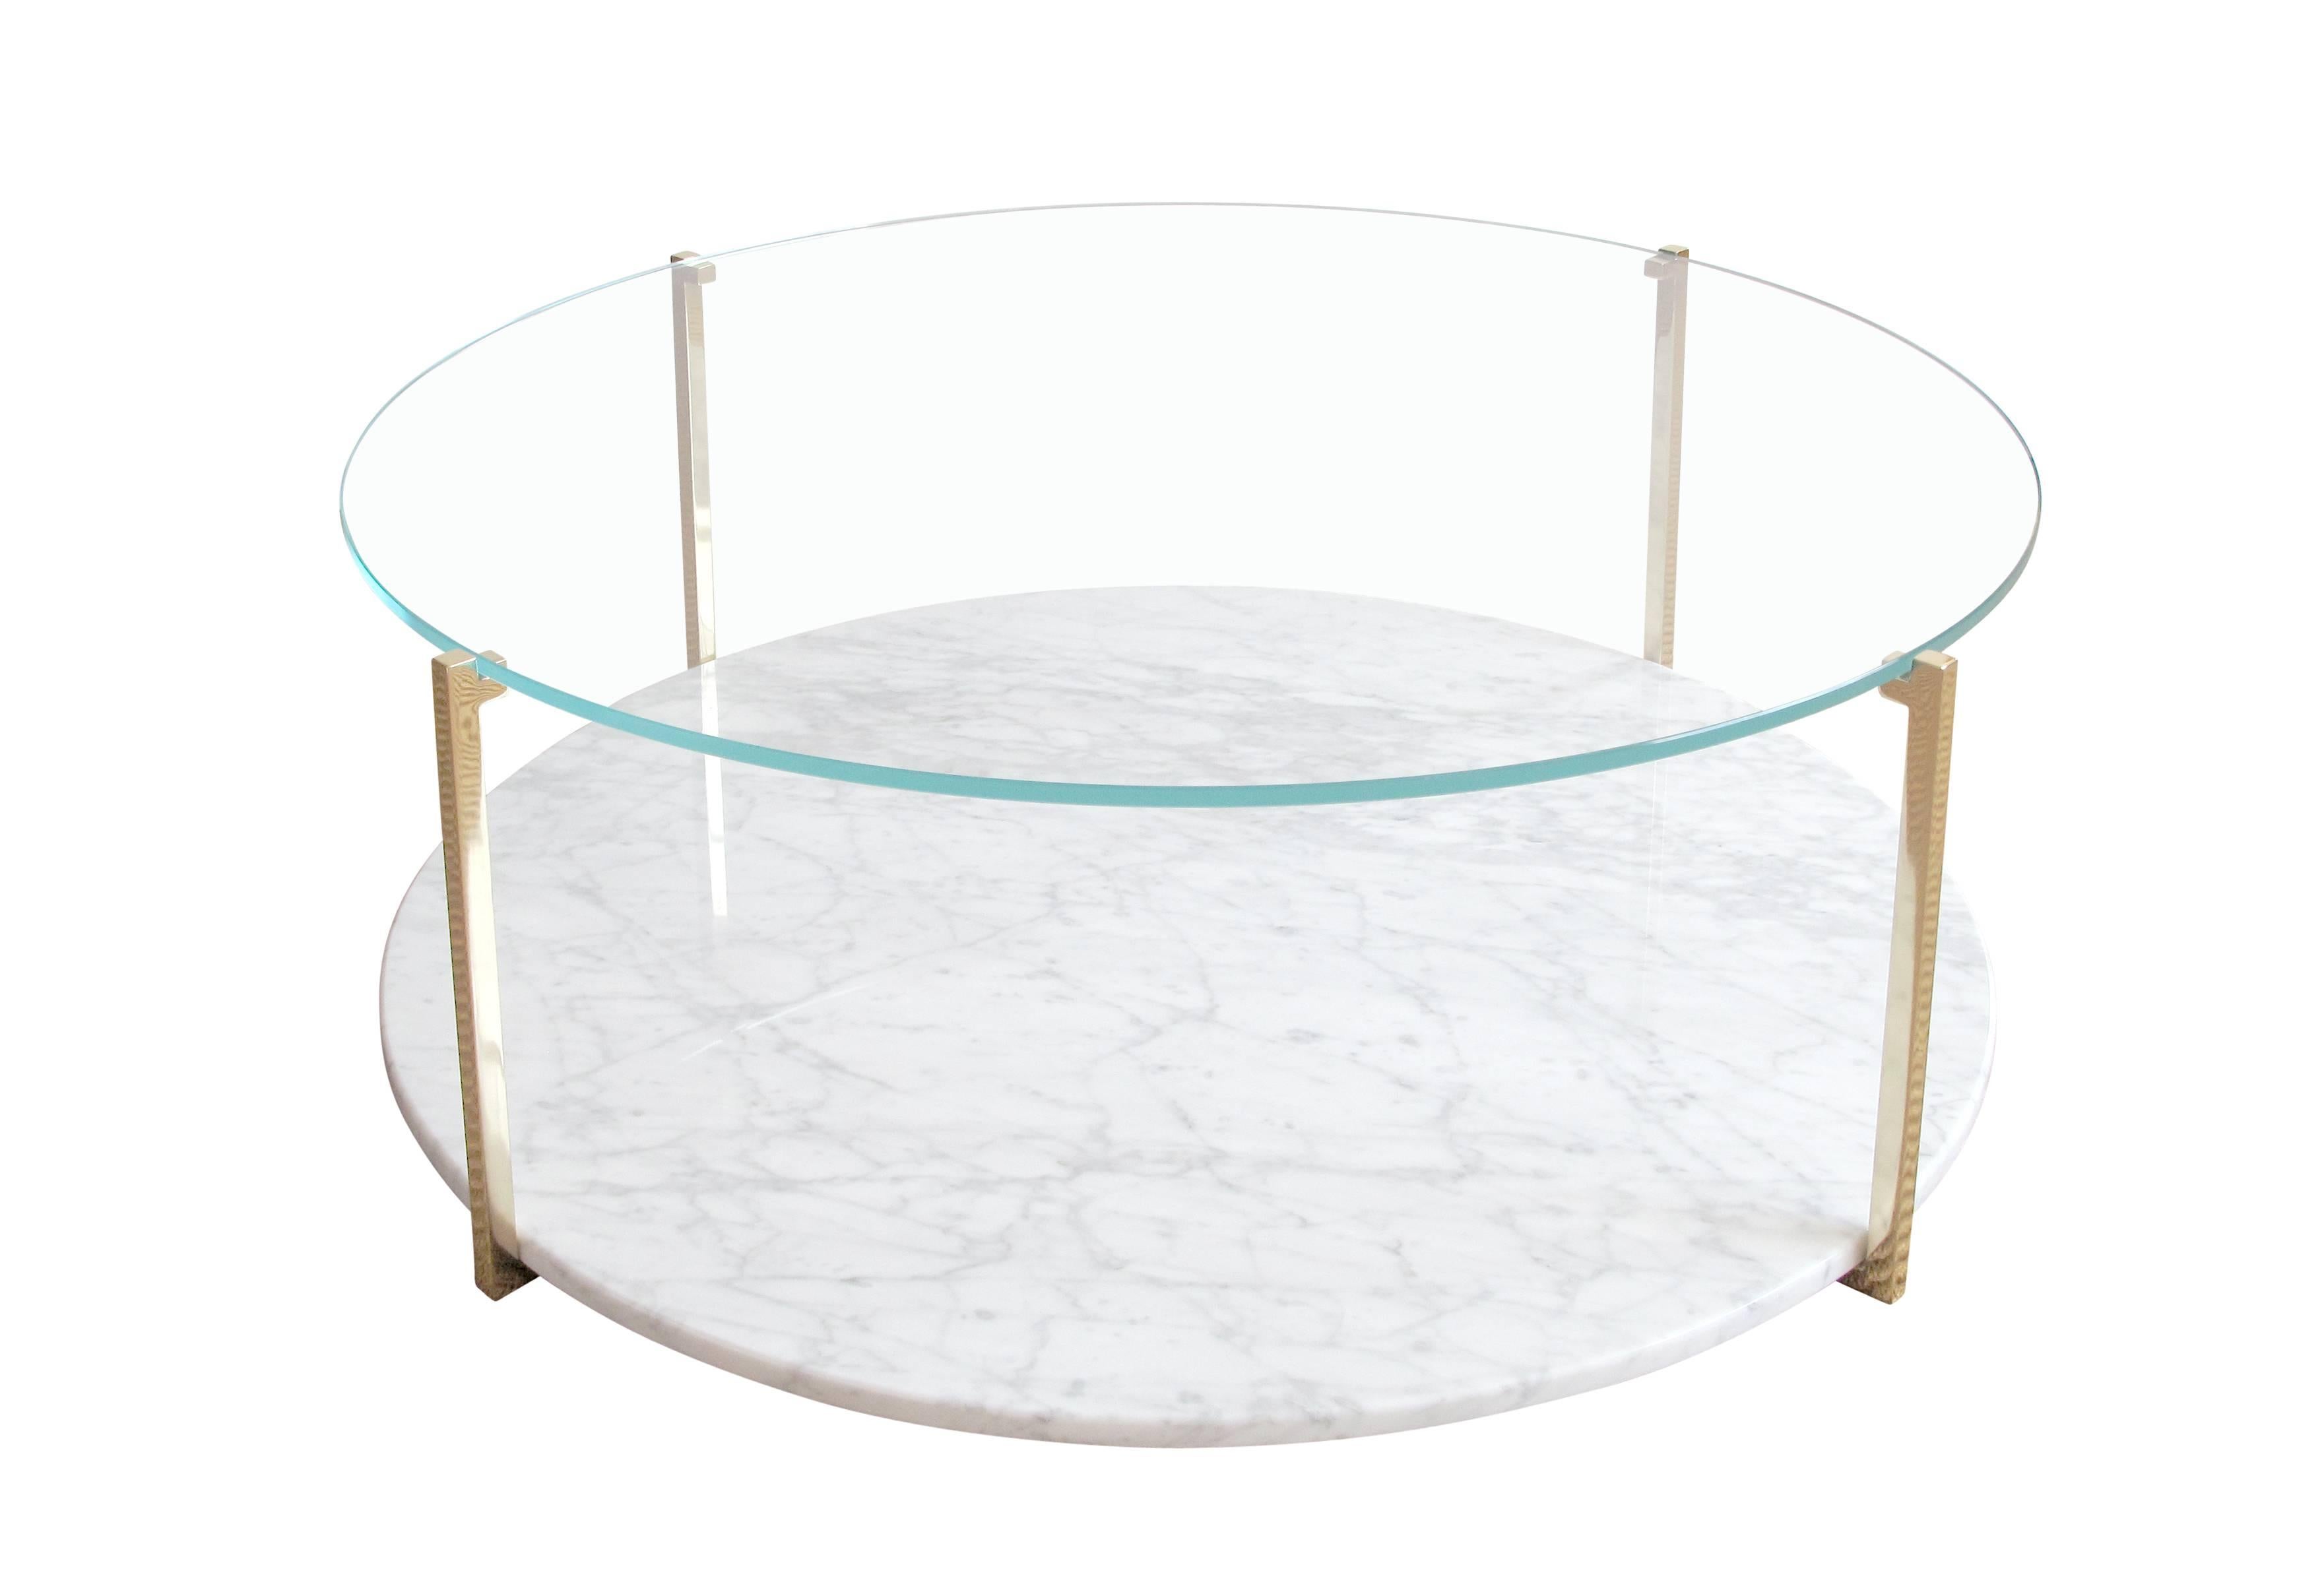 James Devlin Studio’s Arturo Cocktail Table is at once lightweight and monumental. Strong enough to anchor a room with its generous cut of slab marble, but possessed of a delicate profile that harmonizes and joins together seating elements in any